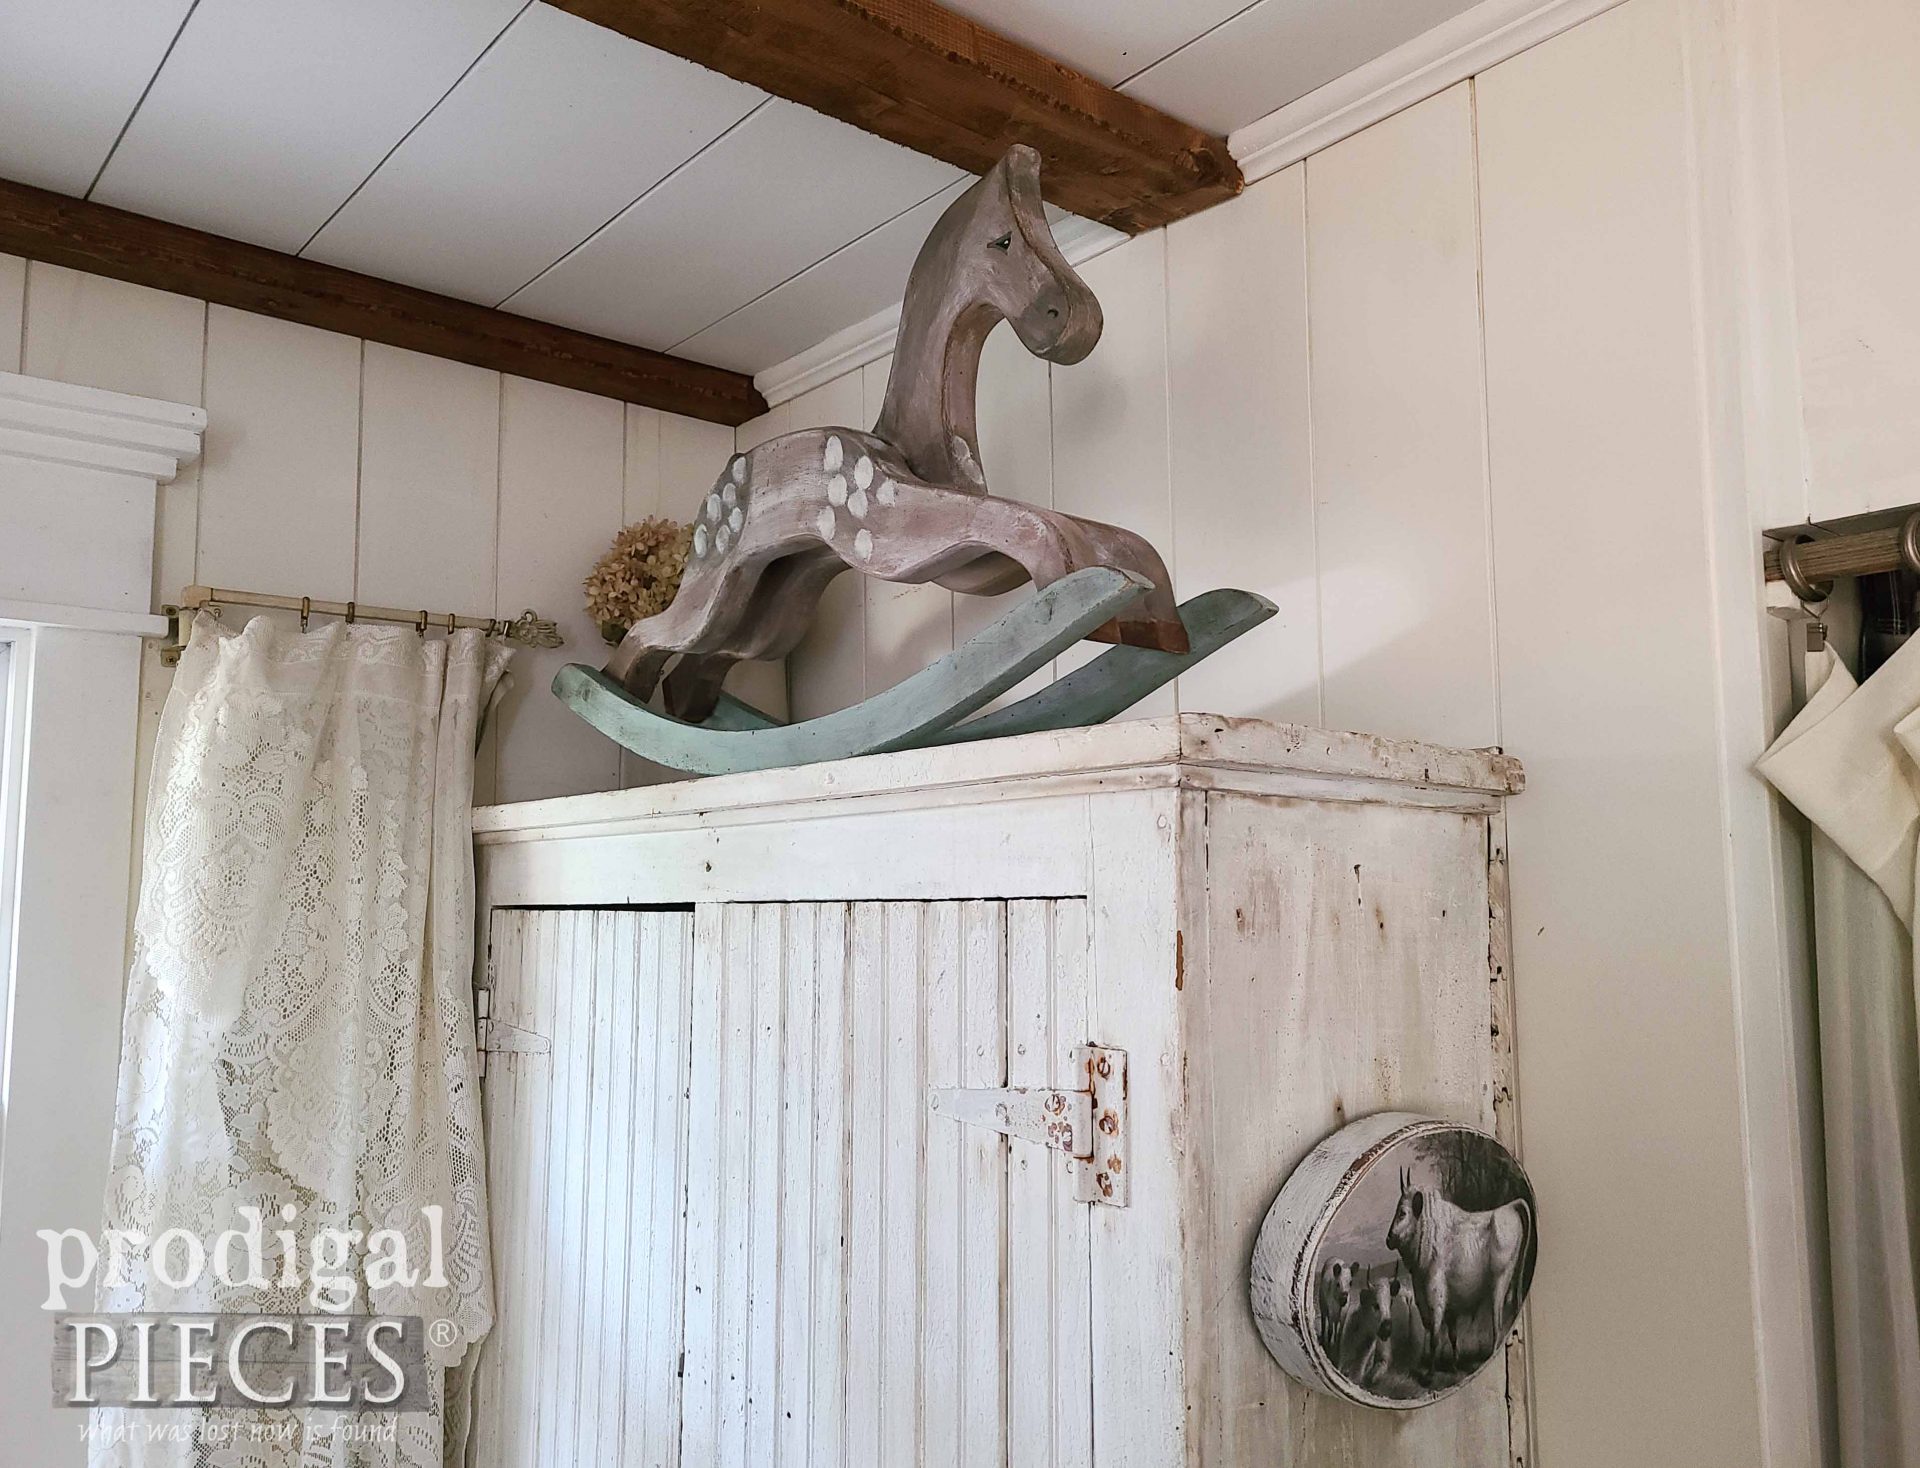 Farmhouse Bedroom Cupboard with Antique Rocking Horse by Larissa of Prodigal Pieces | prodigalpieces.com #prodigalpieces #farmhouse #home #homedecor